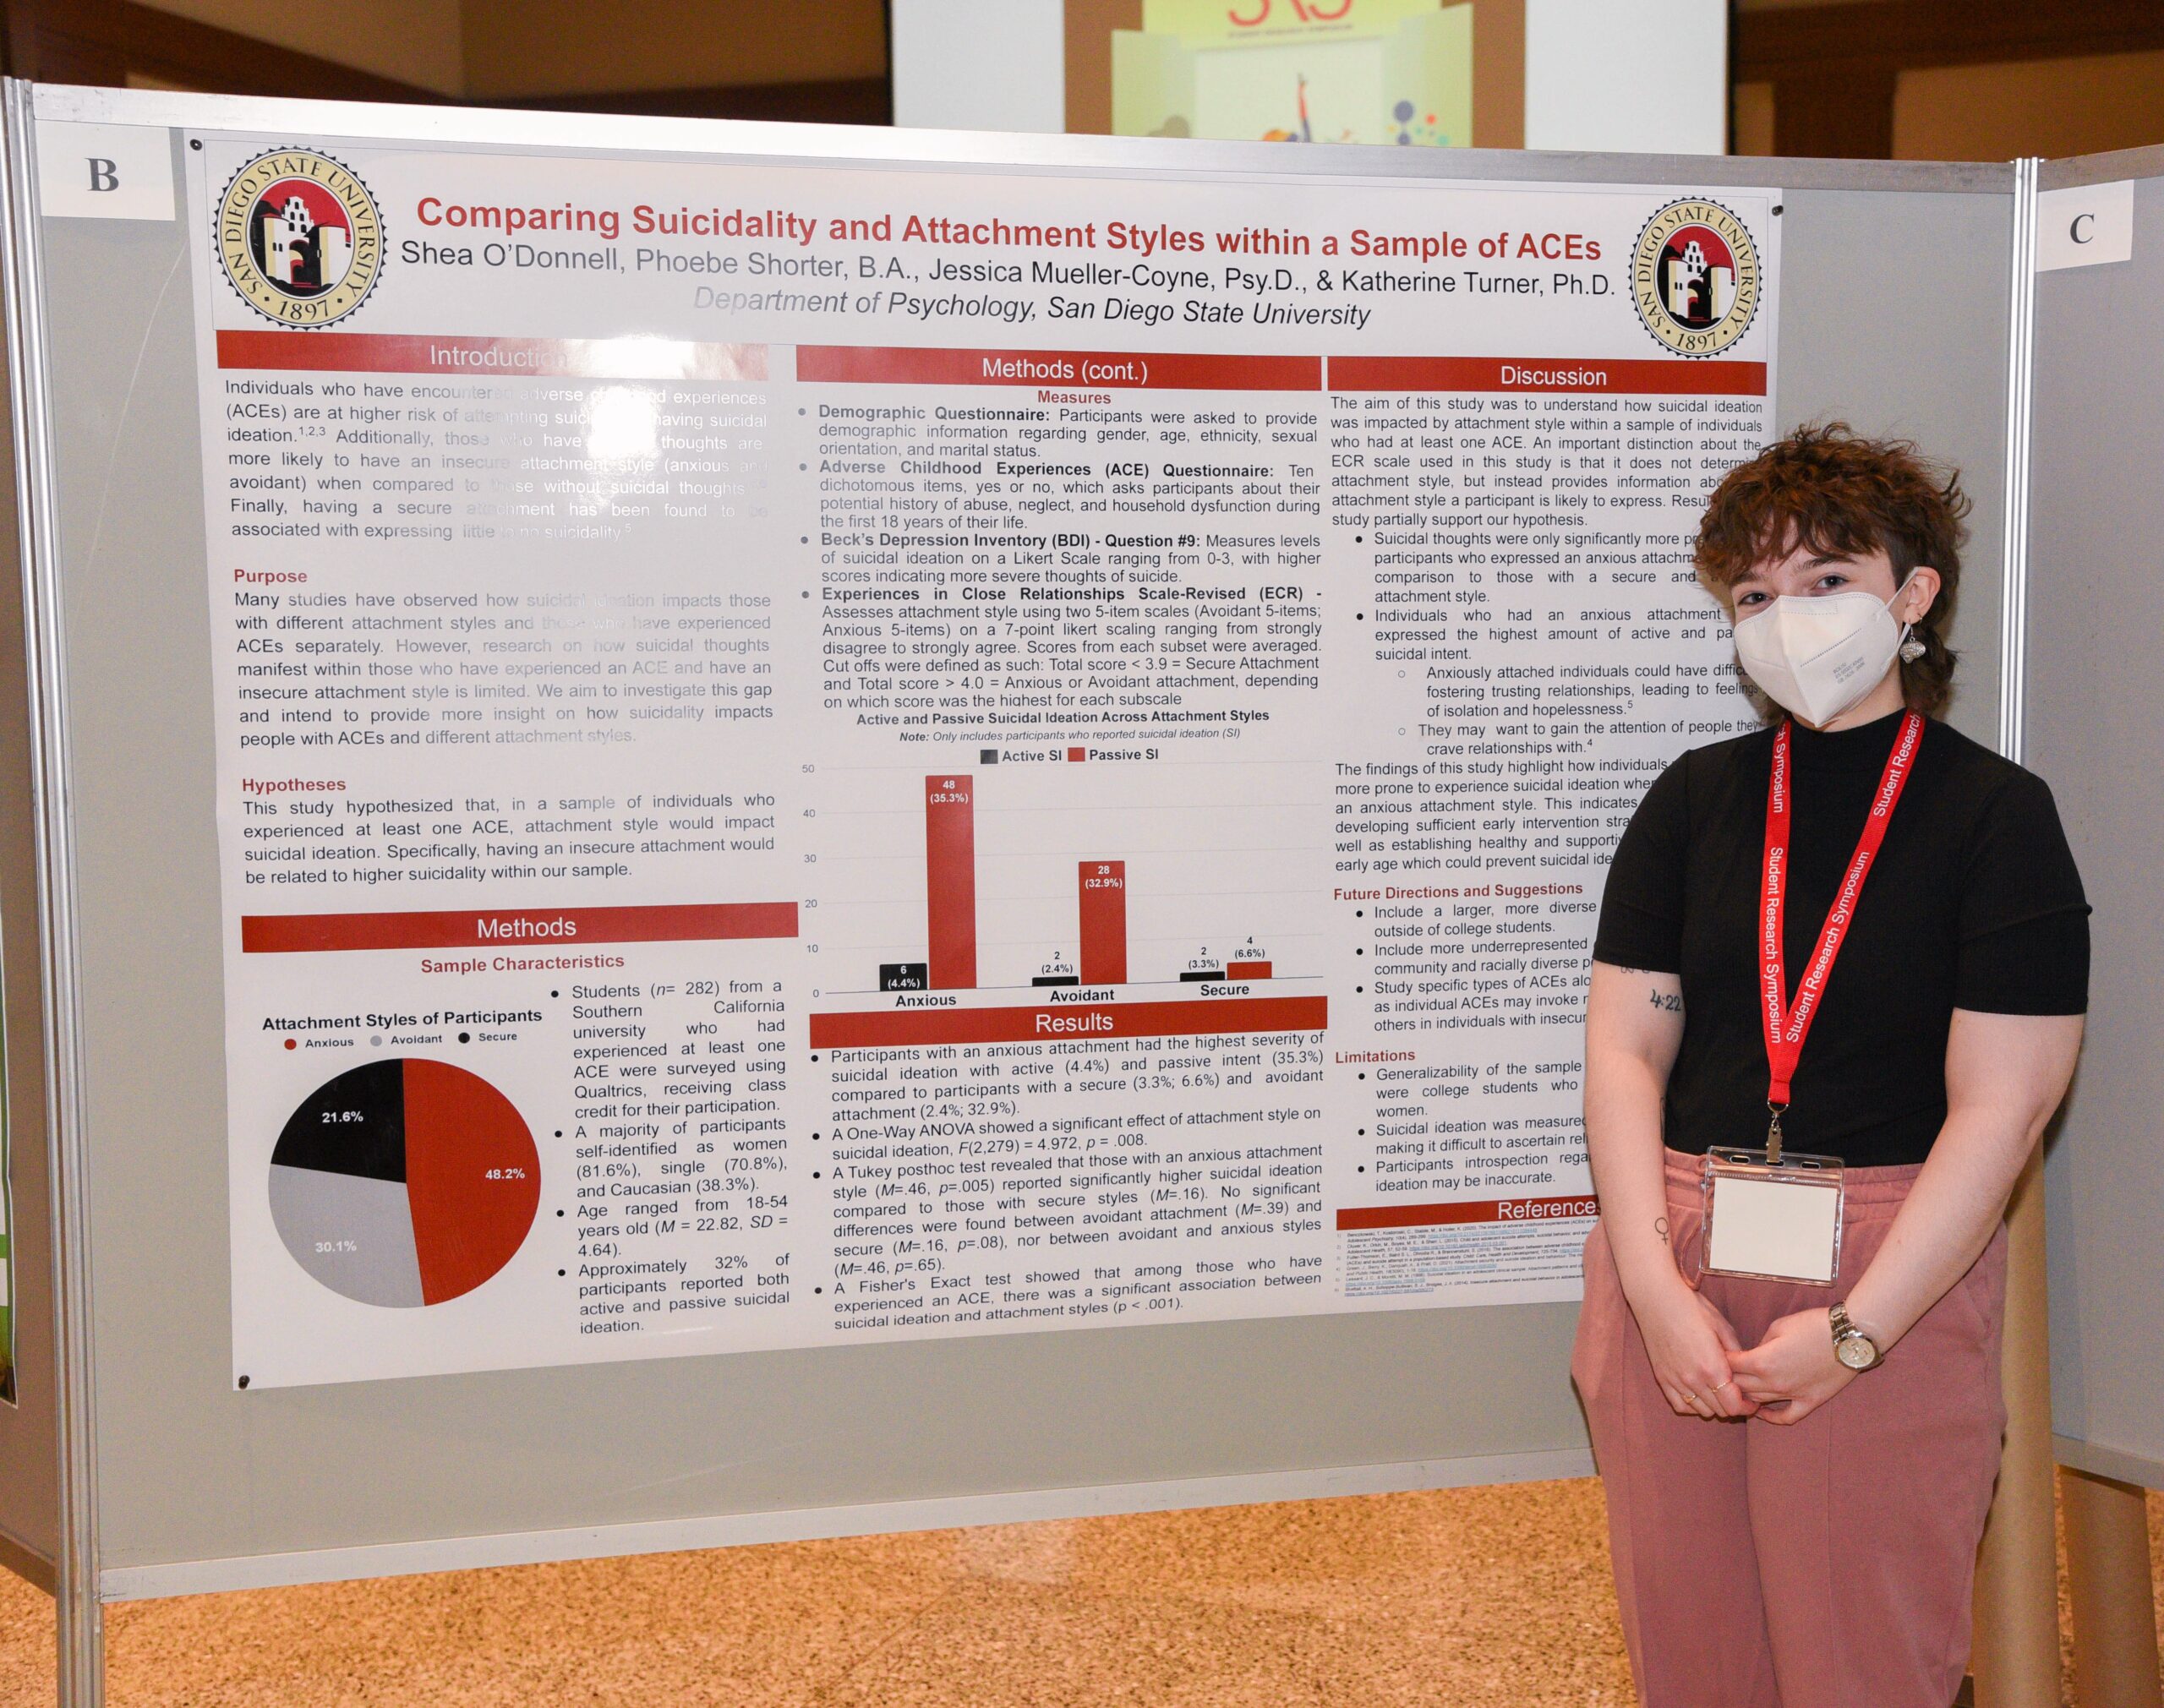 A person wearing a black top and reddish pants stands in front of a research poster